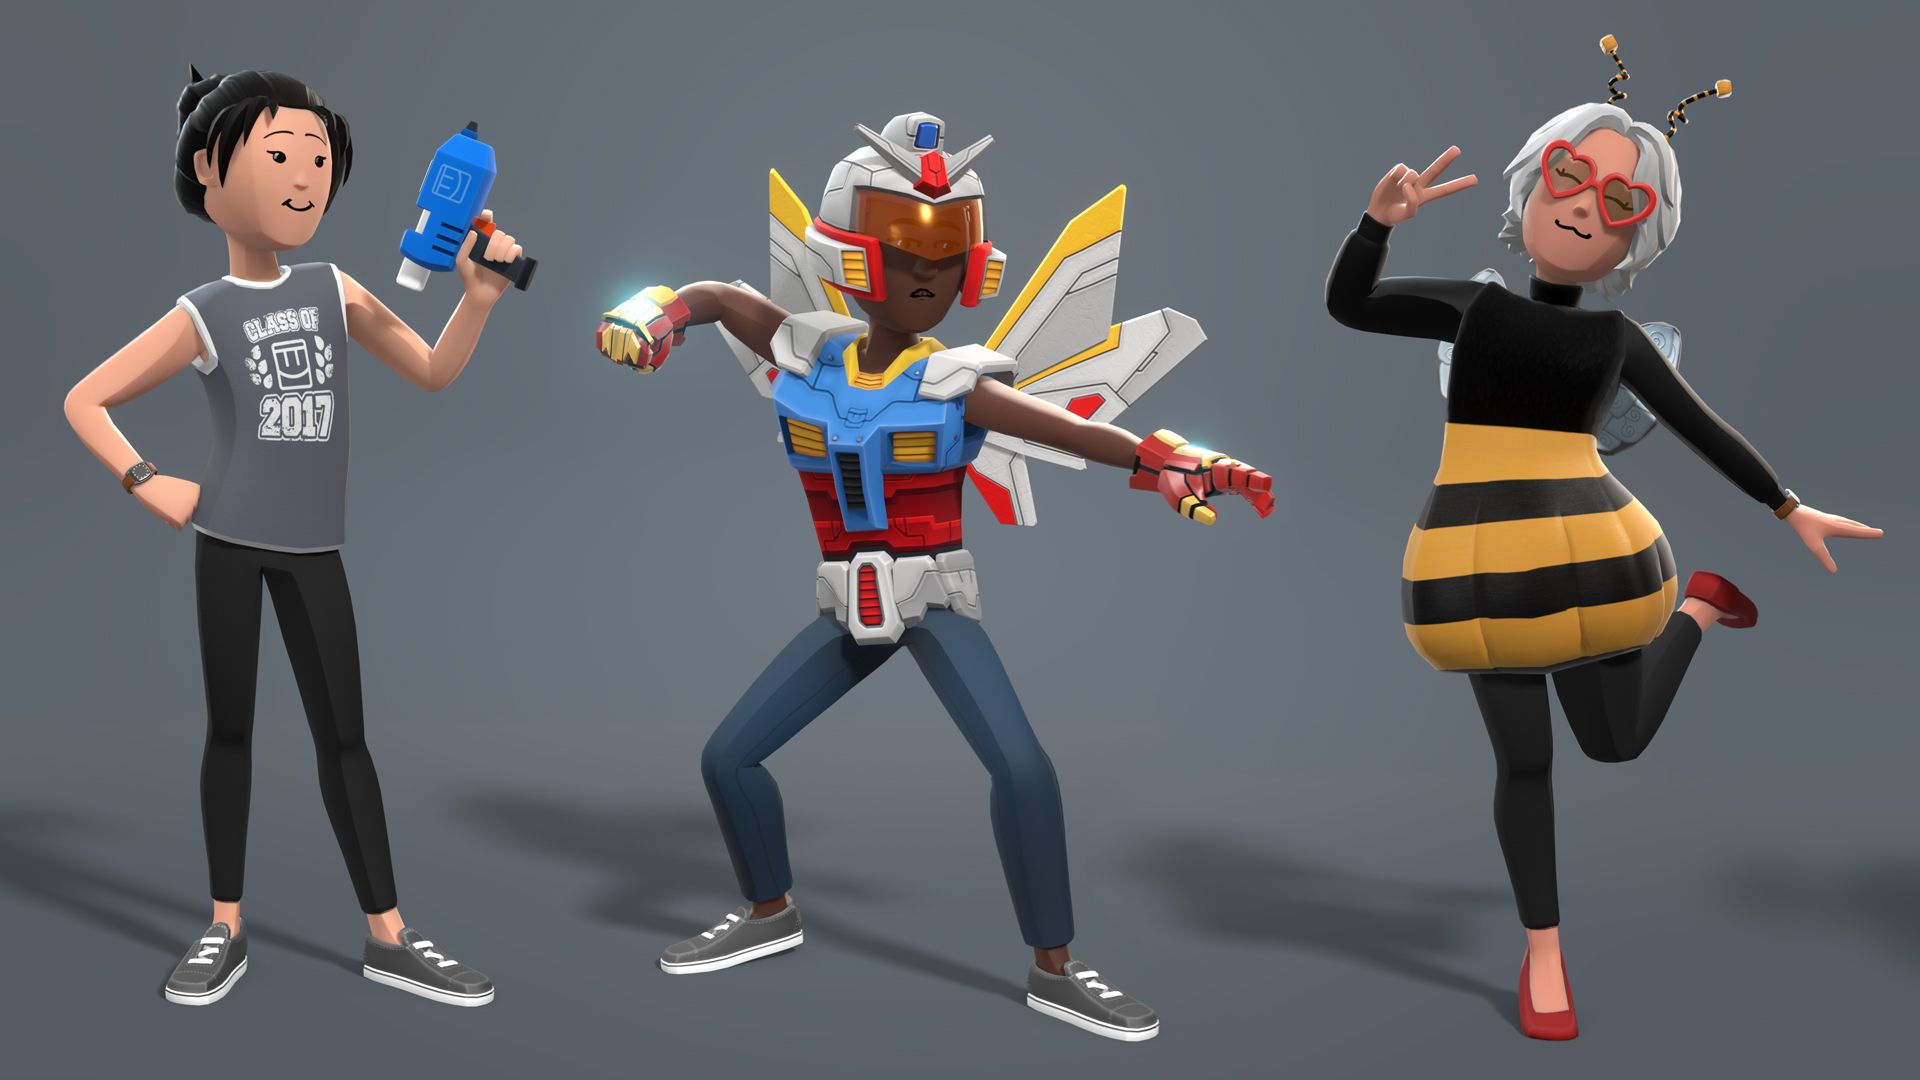 Rec Room' to Roll Out Full-body Avatars in March